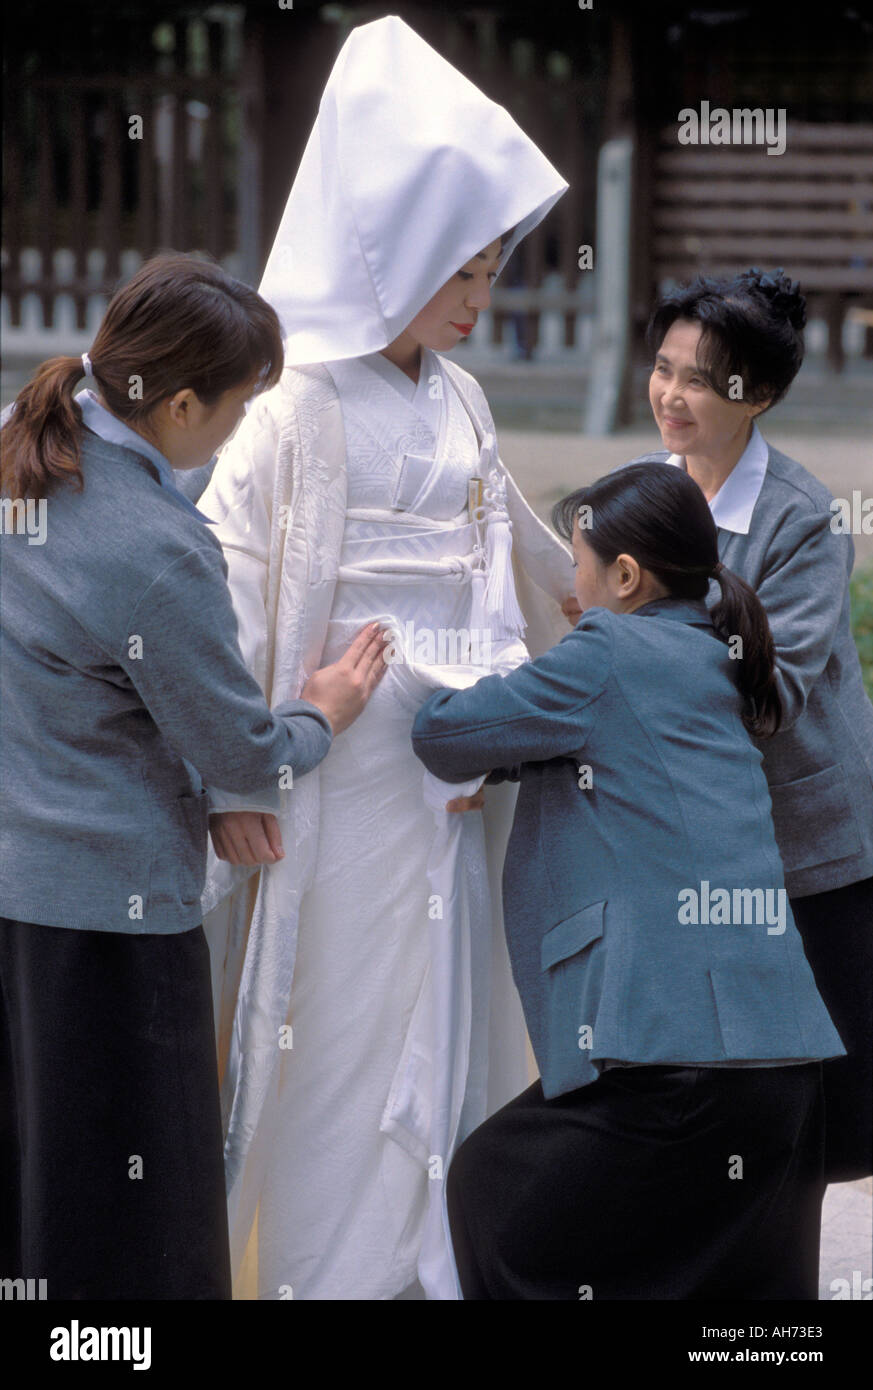 Three assistants fussing with the bride's white kimono worn during a traditional wedding ceremony Stock Photo